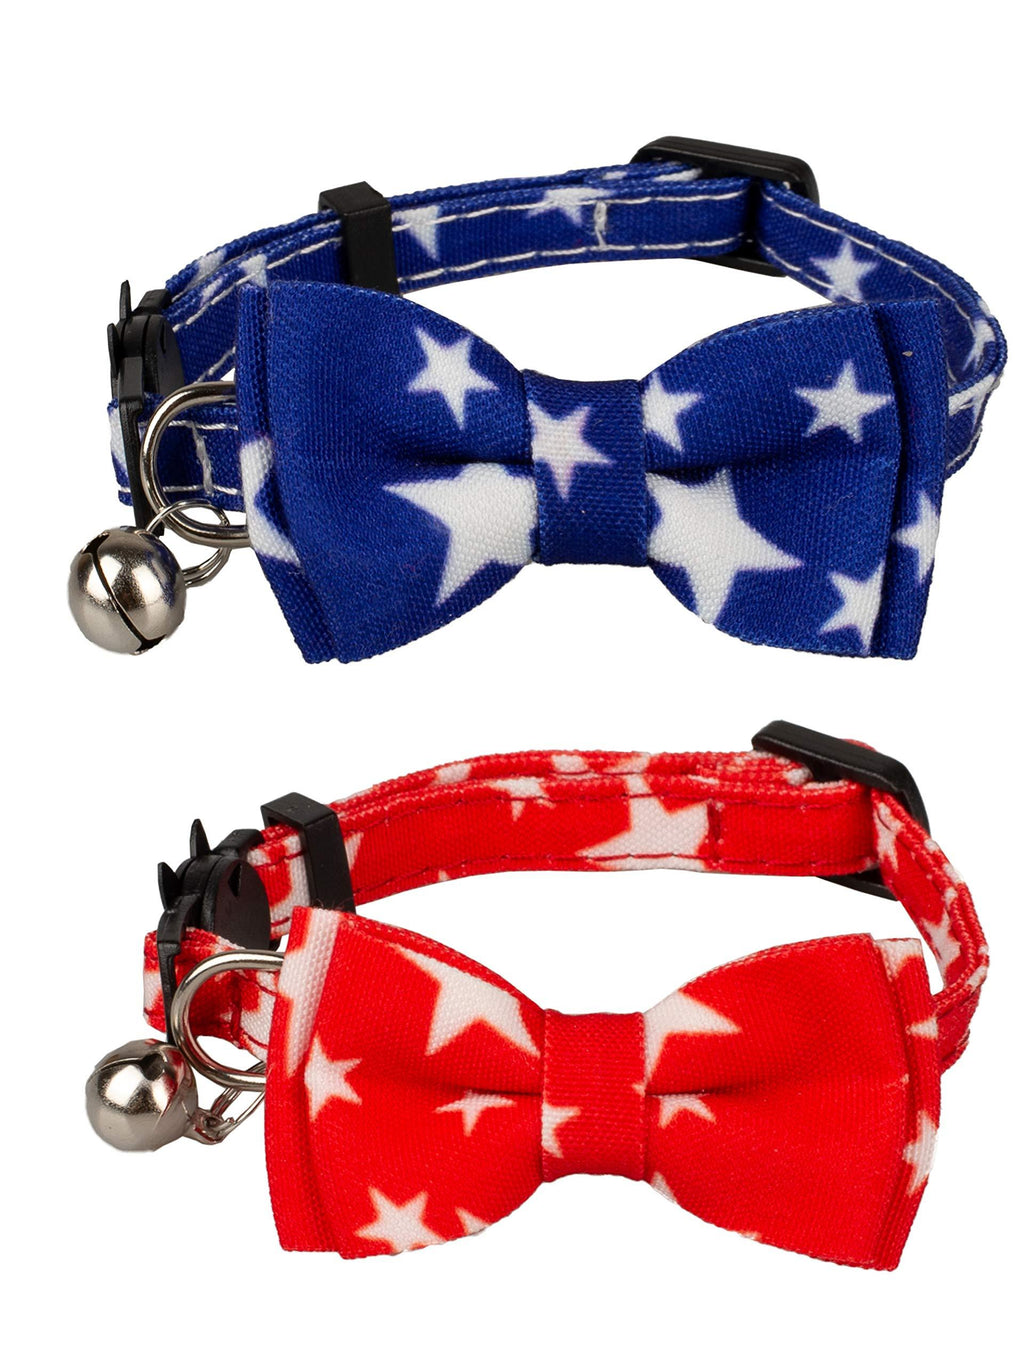 [Australia] - Gyapet Collar for Cats Pets Breakaway with Bell Bowtie Floral Bow Detachable Adjustable Safety Puppy 2pcs US Flag-Red & Blue 